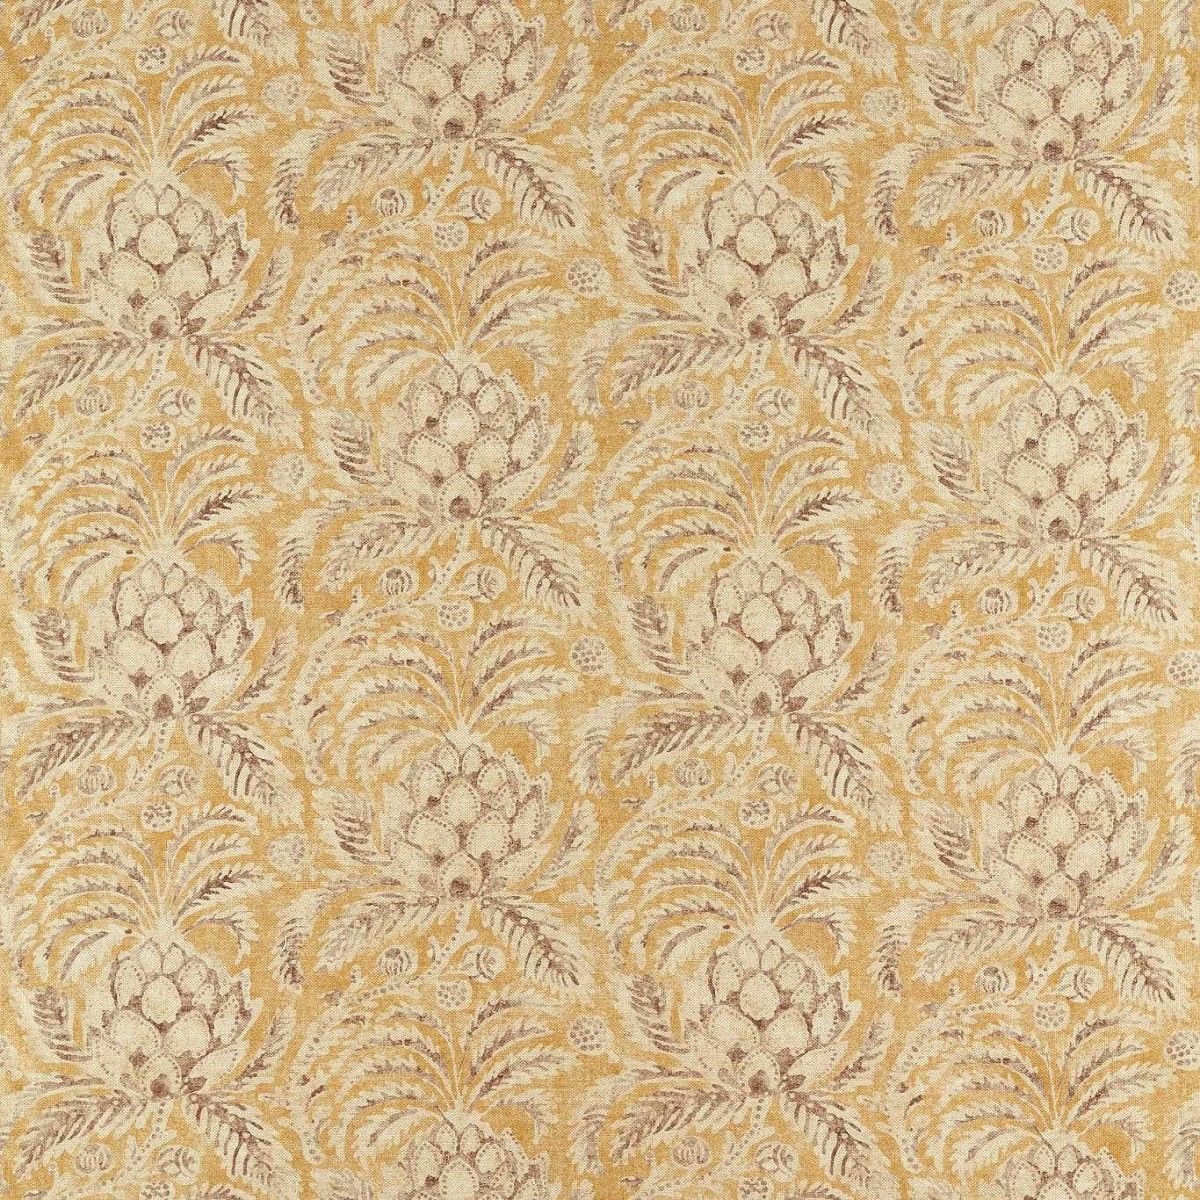 Pina de Indes Tigers Eye Fabric by Zoffany